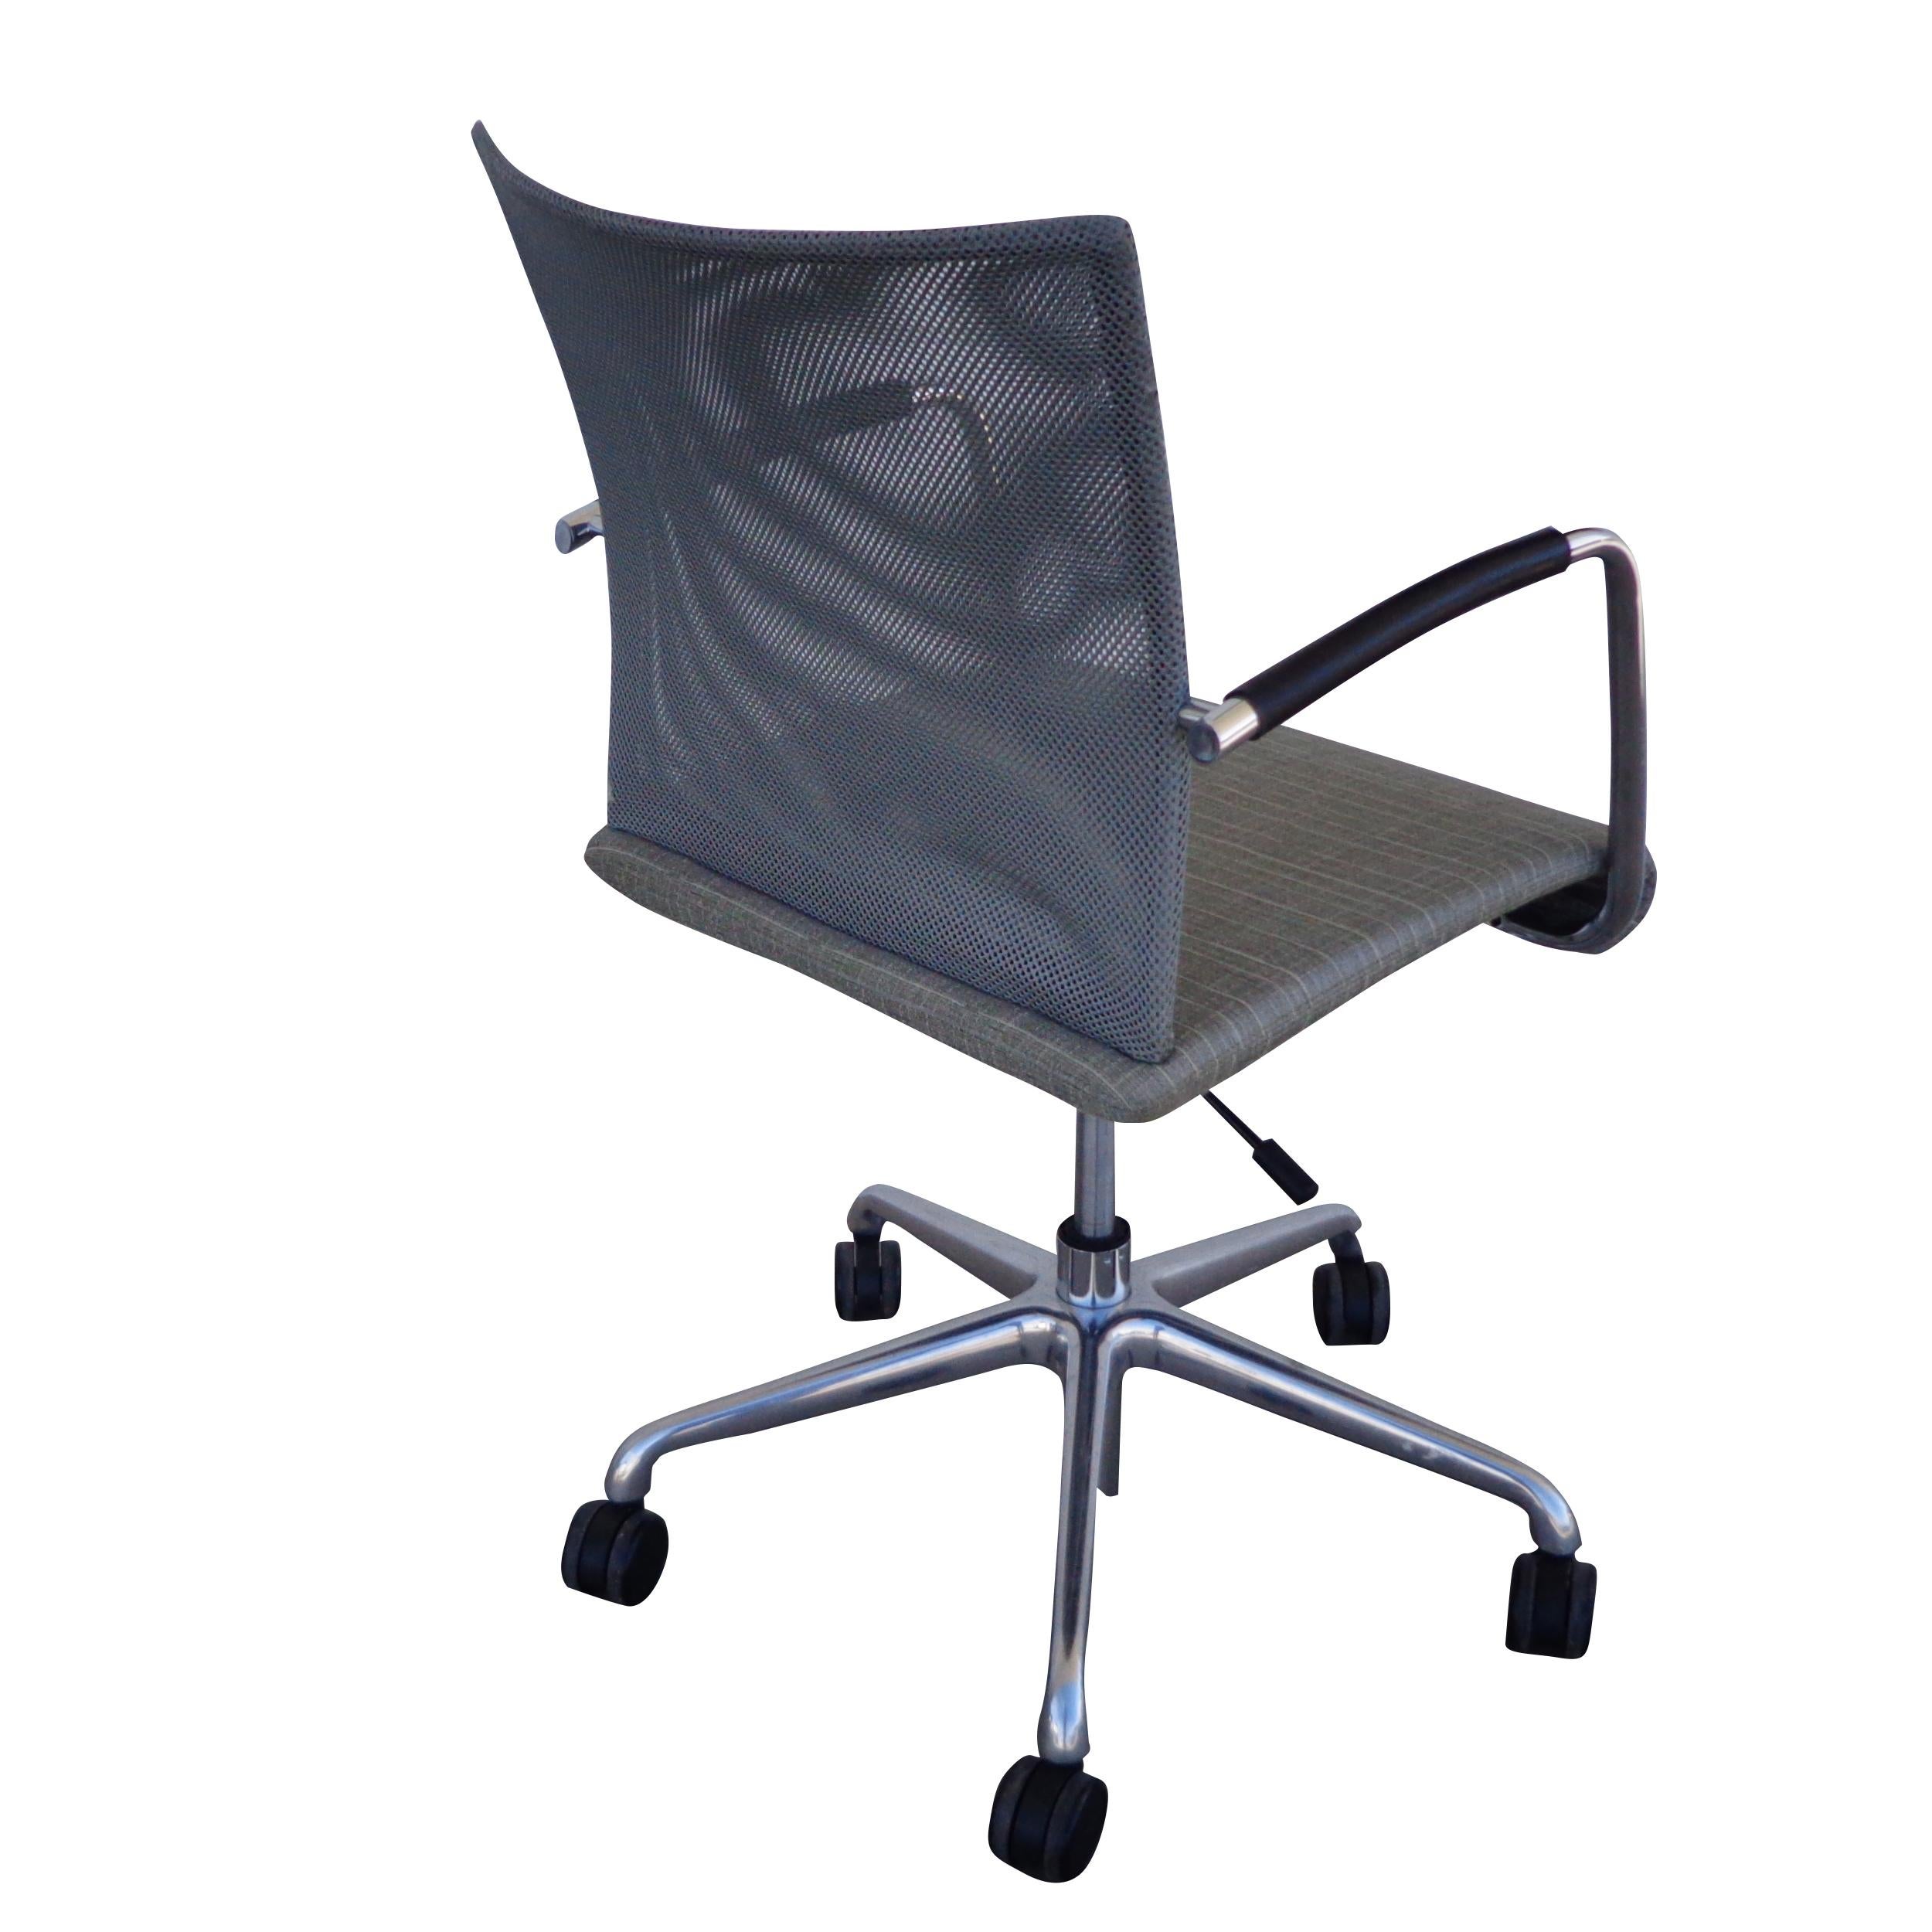 Chrome 6 Dauphin Stilo Conference Chairs by Jessica Engelhardt For Sale